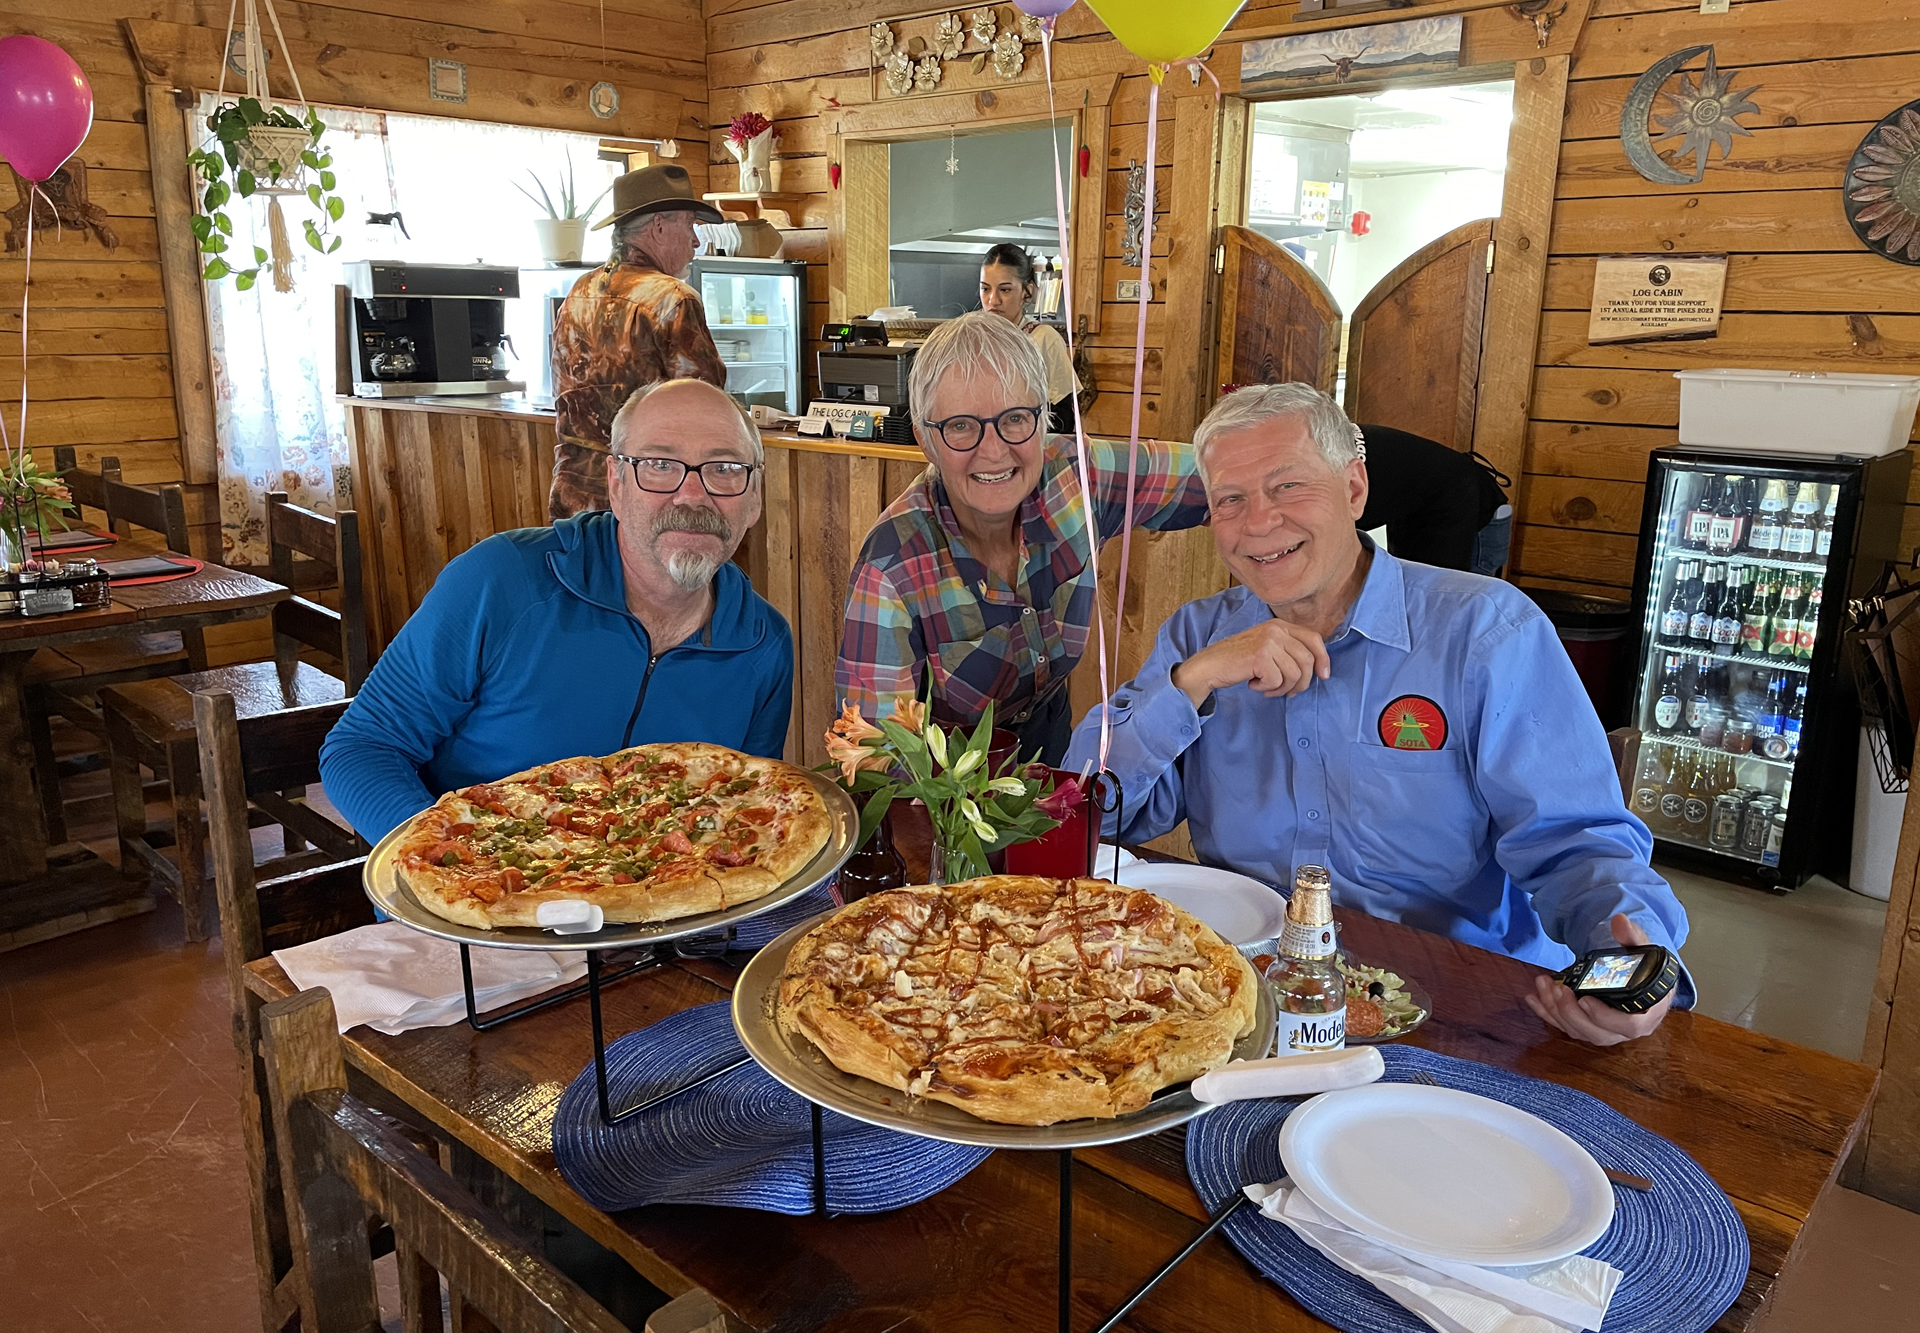 Ken, Dennis and me with pizzas at the Log Cabin